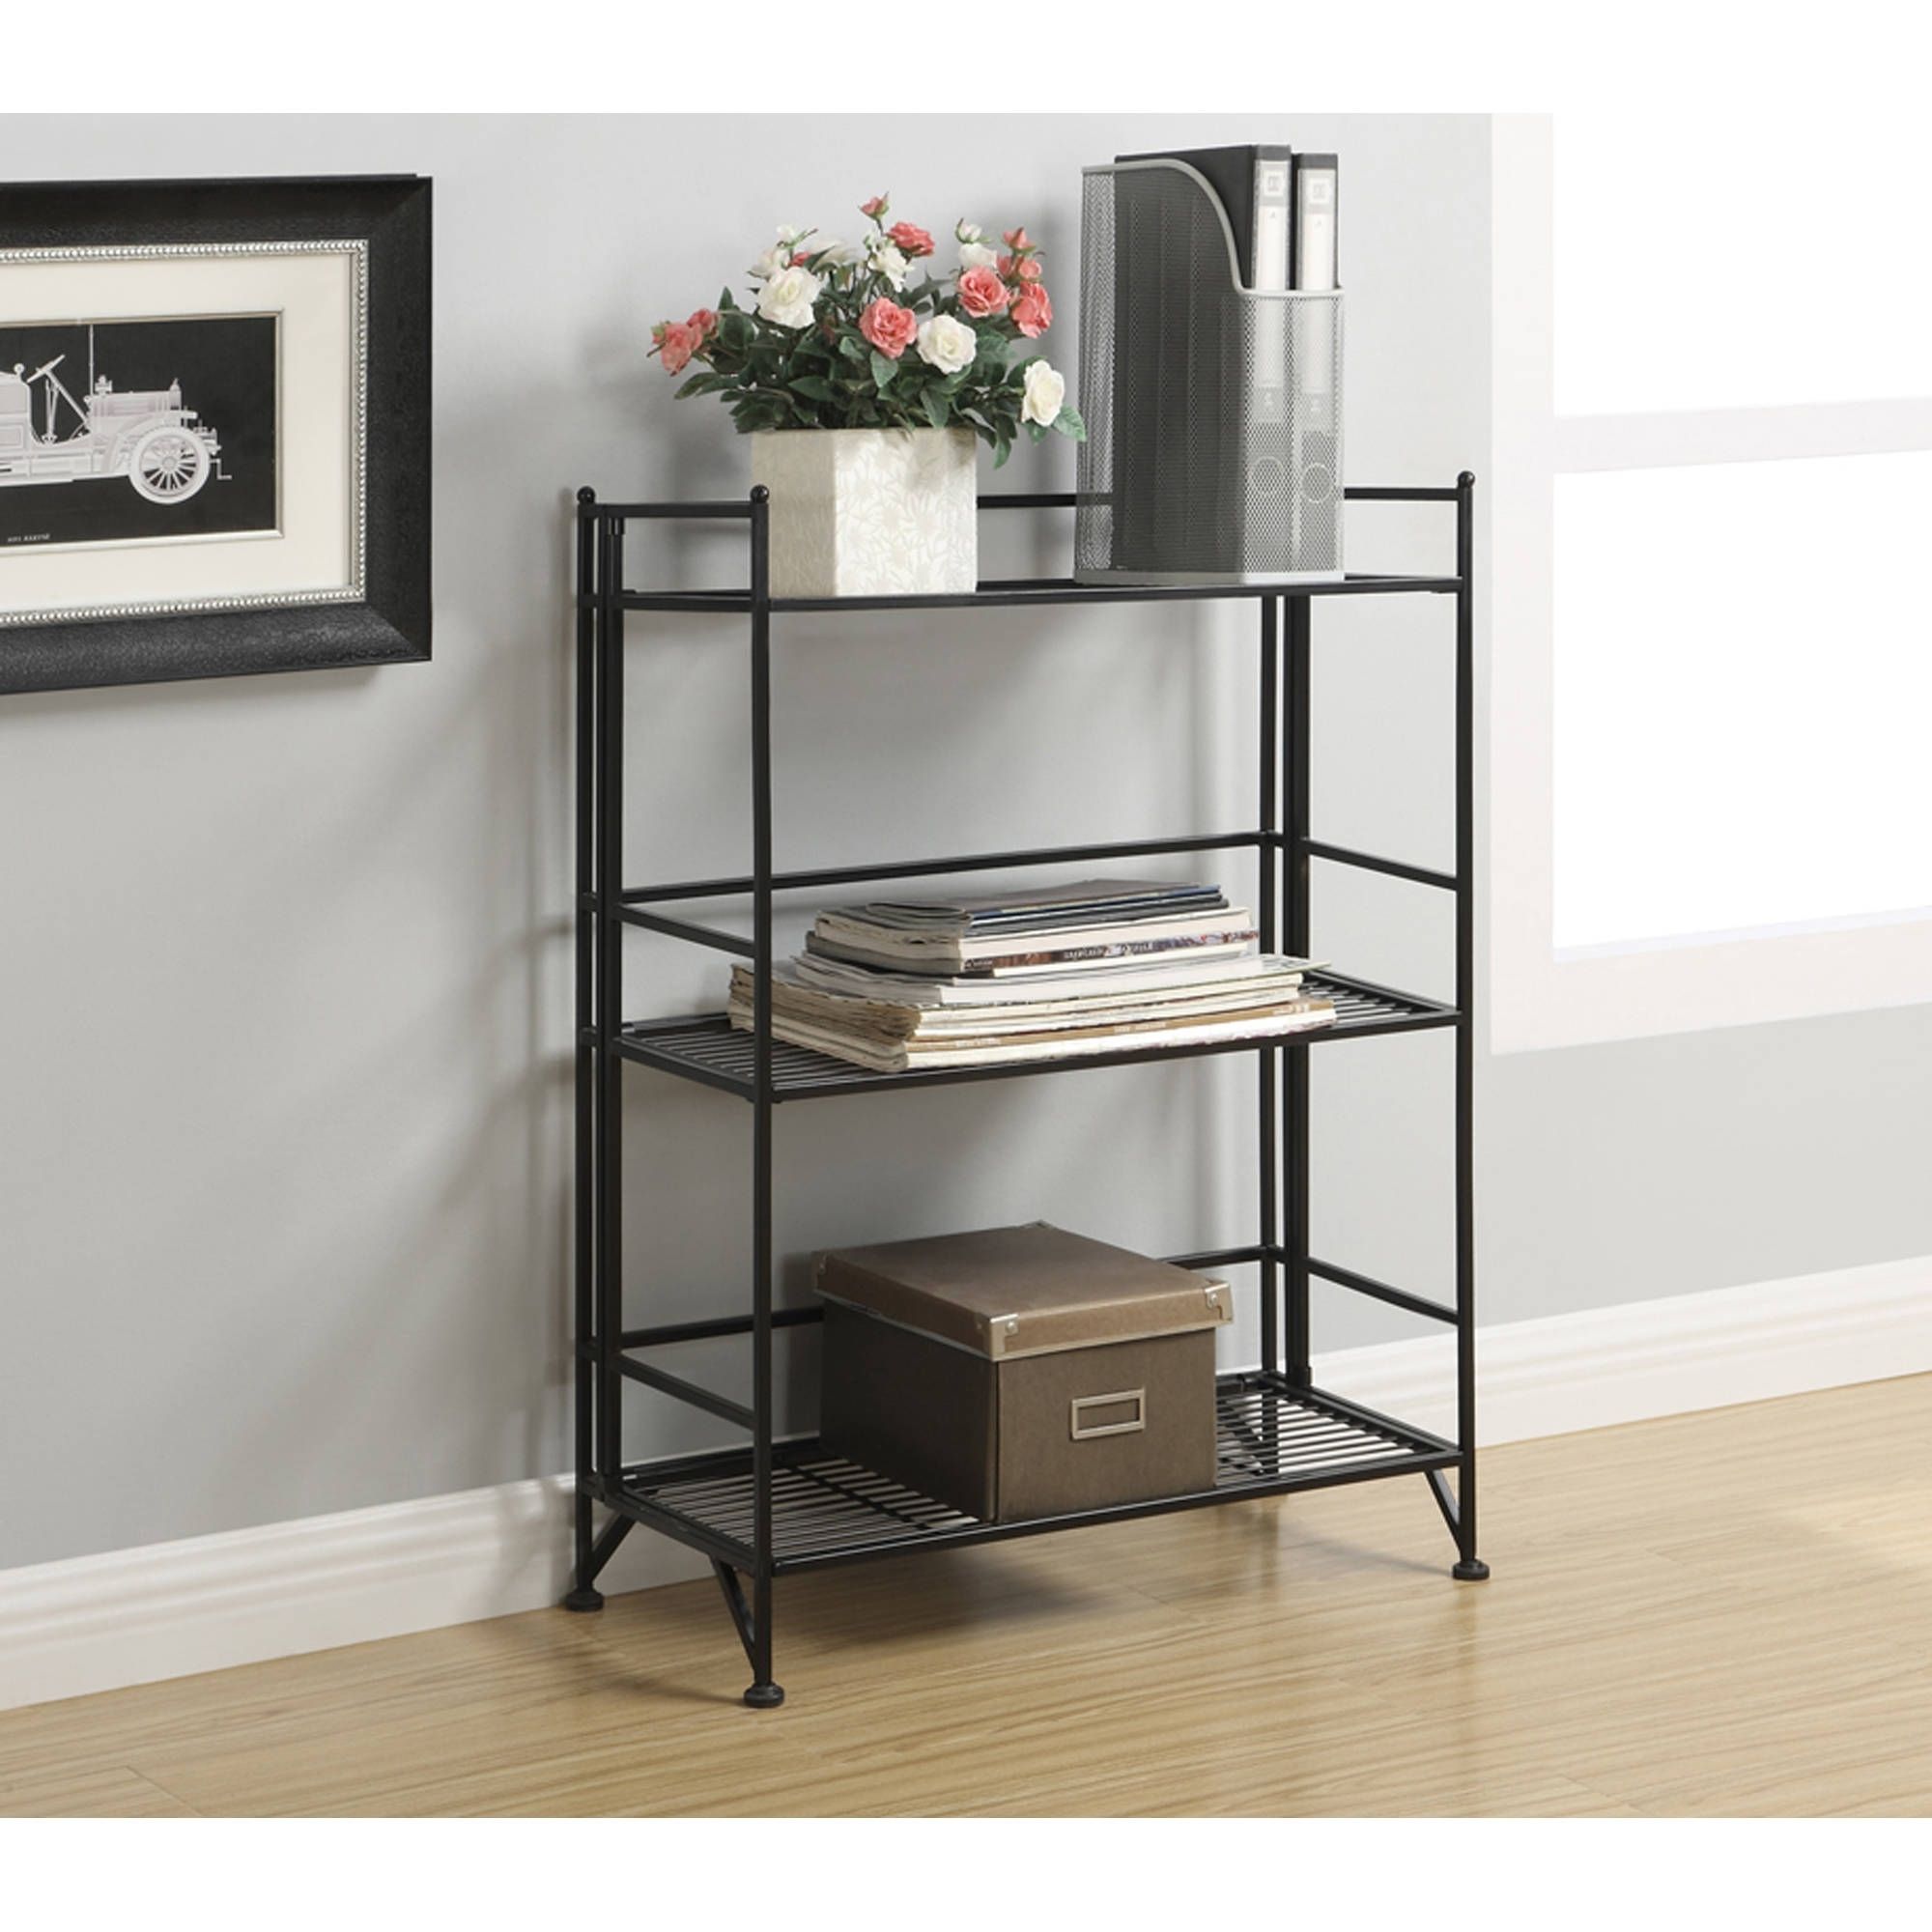 Best And Newest Mainstays 3 Shelf Bookcases Intended For 43 Mainstays 5 Shelf Bookcase Alder, Mainstays 3 Shelf Bookcase (View 12 of 15)